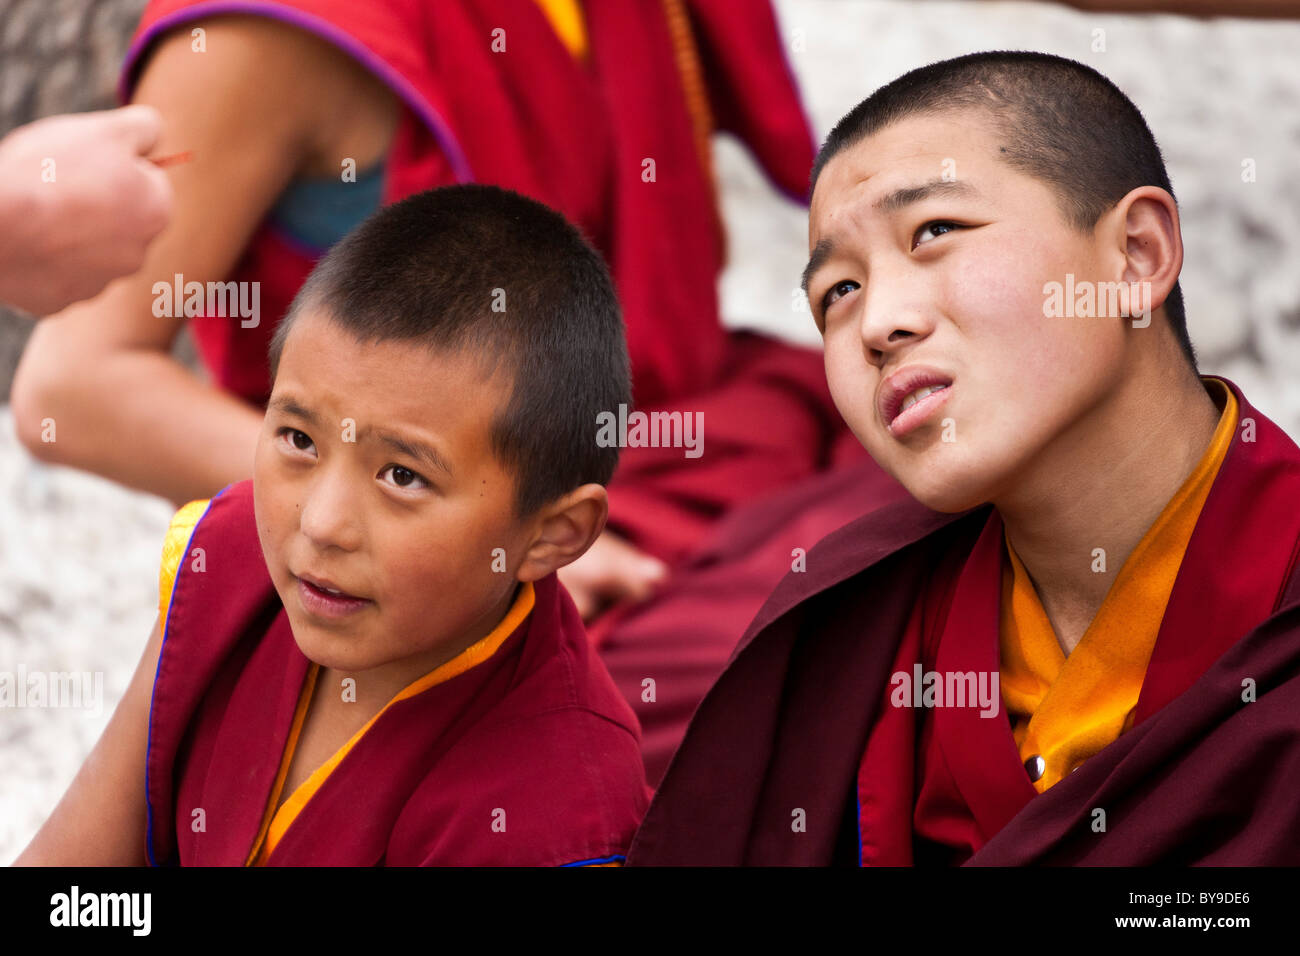 Two young boy monks in the Debating Courtyard at Sera Monastery Lhasa Tibet. JMH4608 Stock Photo